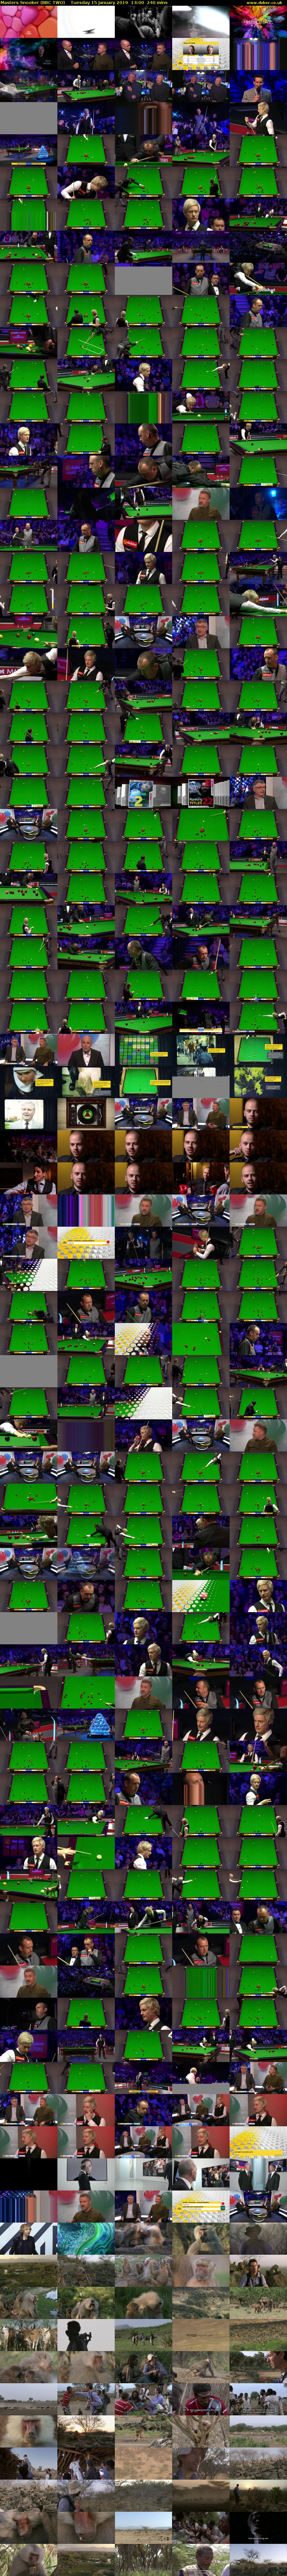 Masters Snooker (BBC TWO) Tuesday 15 January 2019 13:00 - 17:00